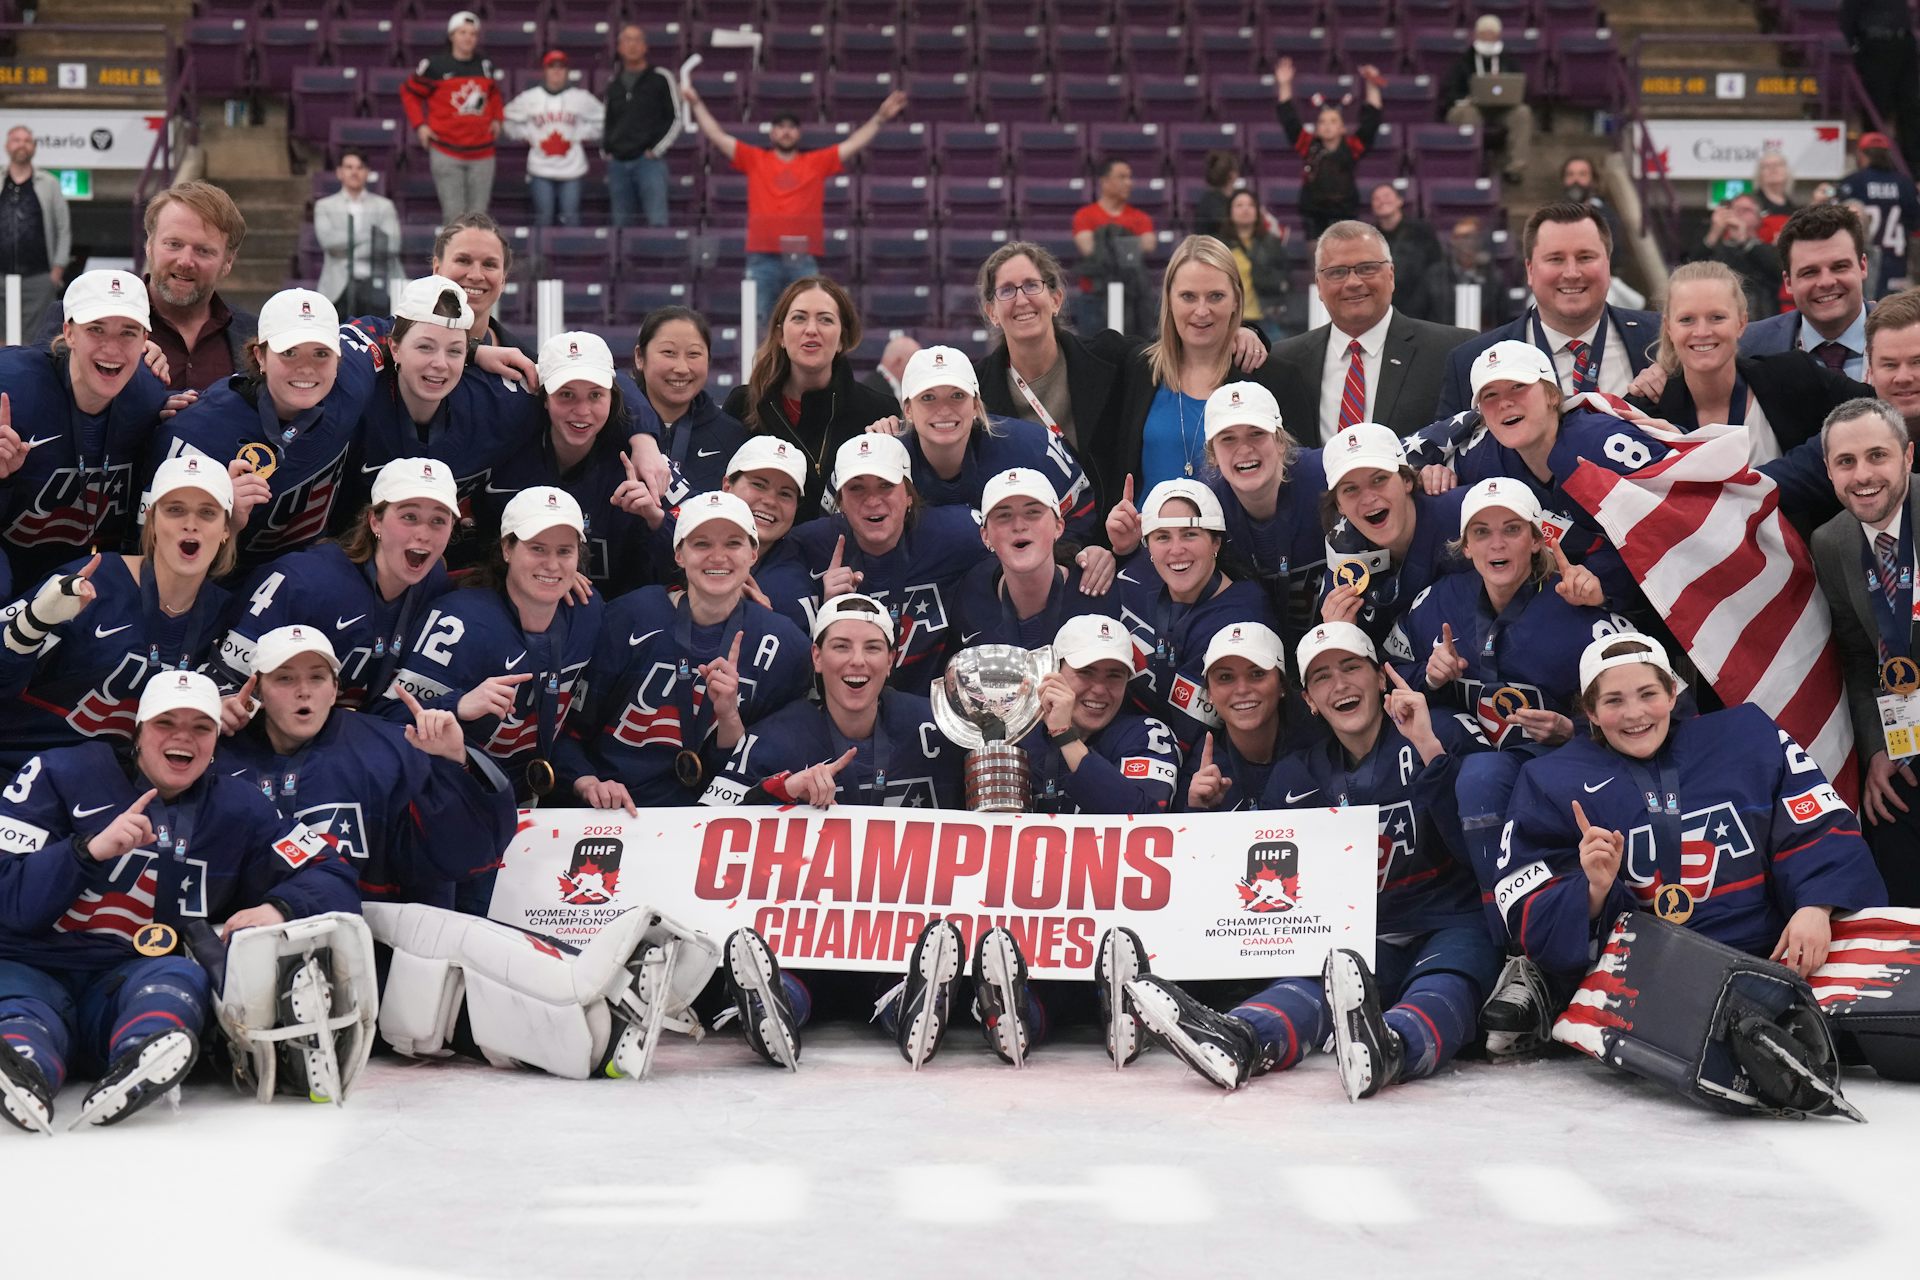 The 2023 World Ice Hockey Championship is a breakthrough moment for womens hockey